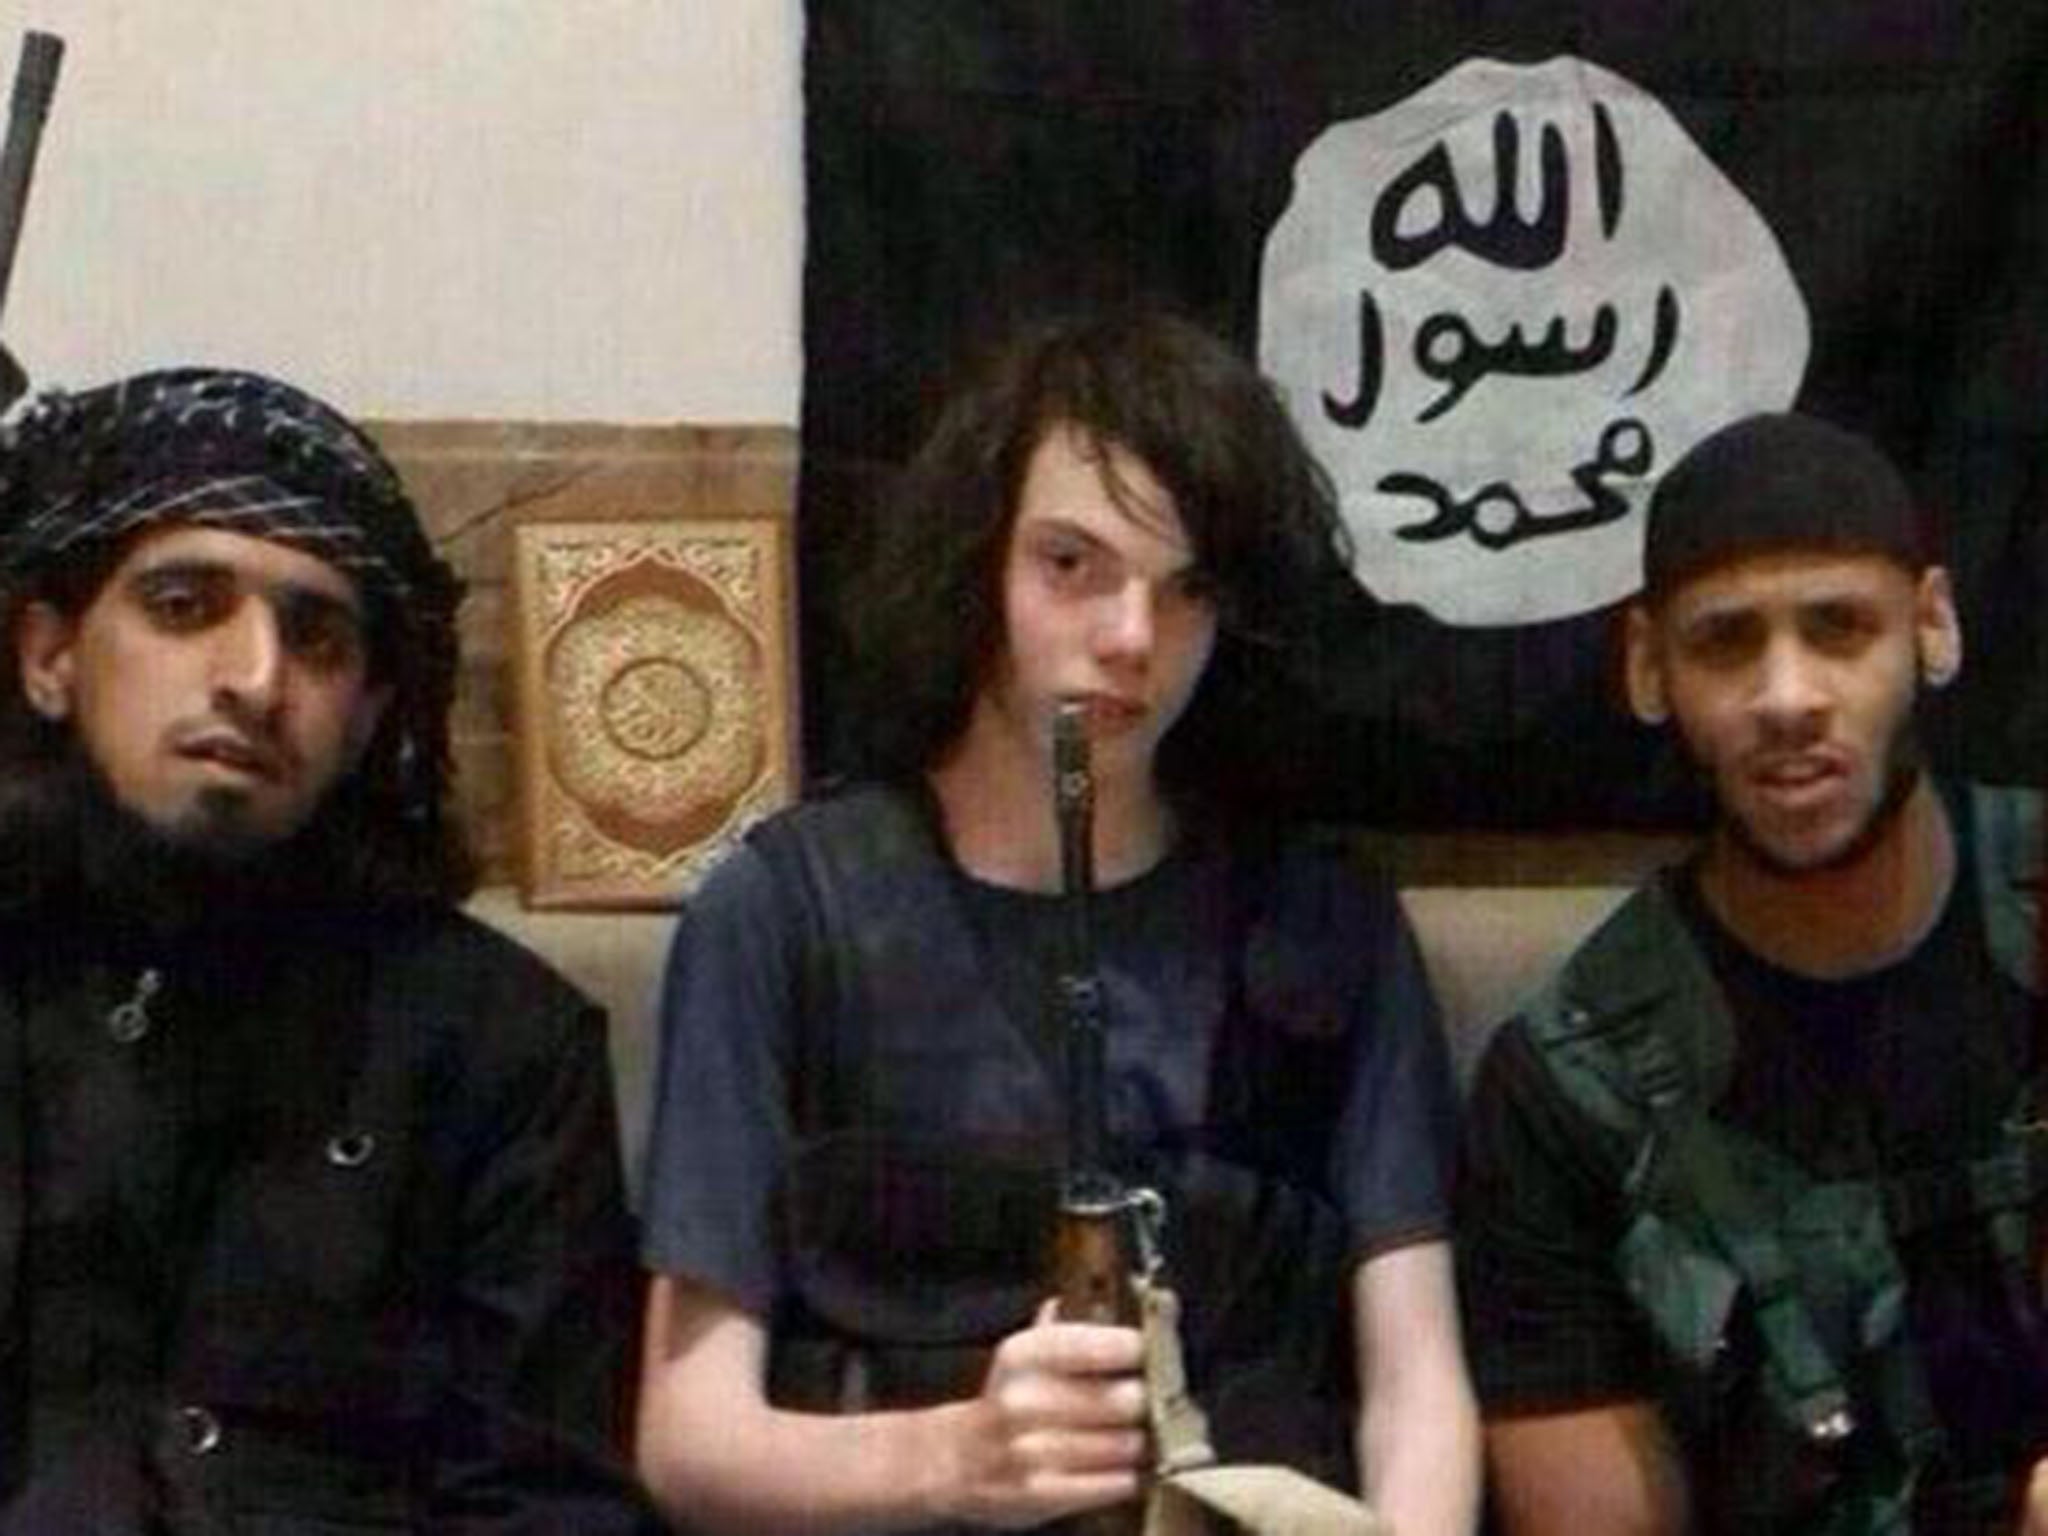 Jake (centre) sits between two men believed to be Islamic State fighters